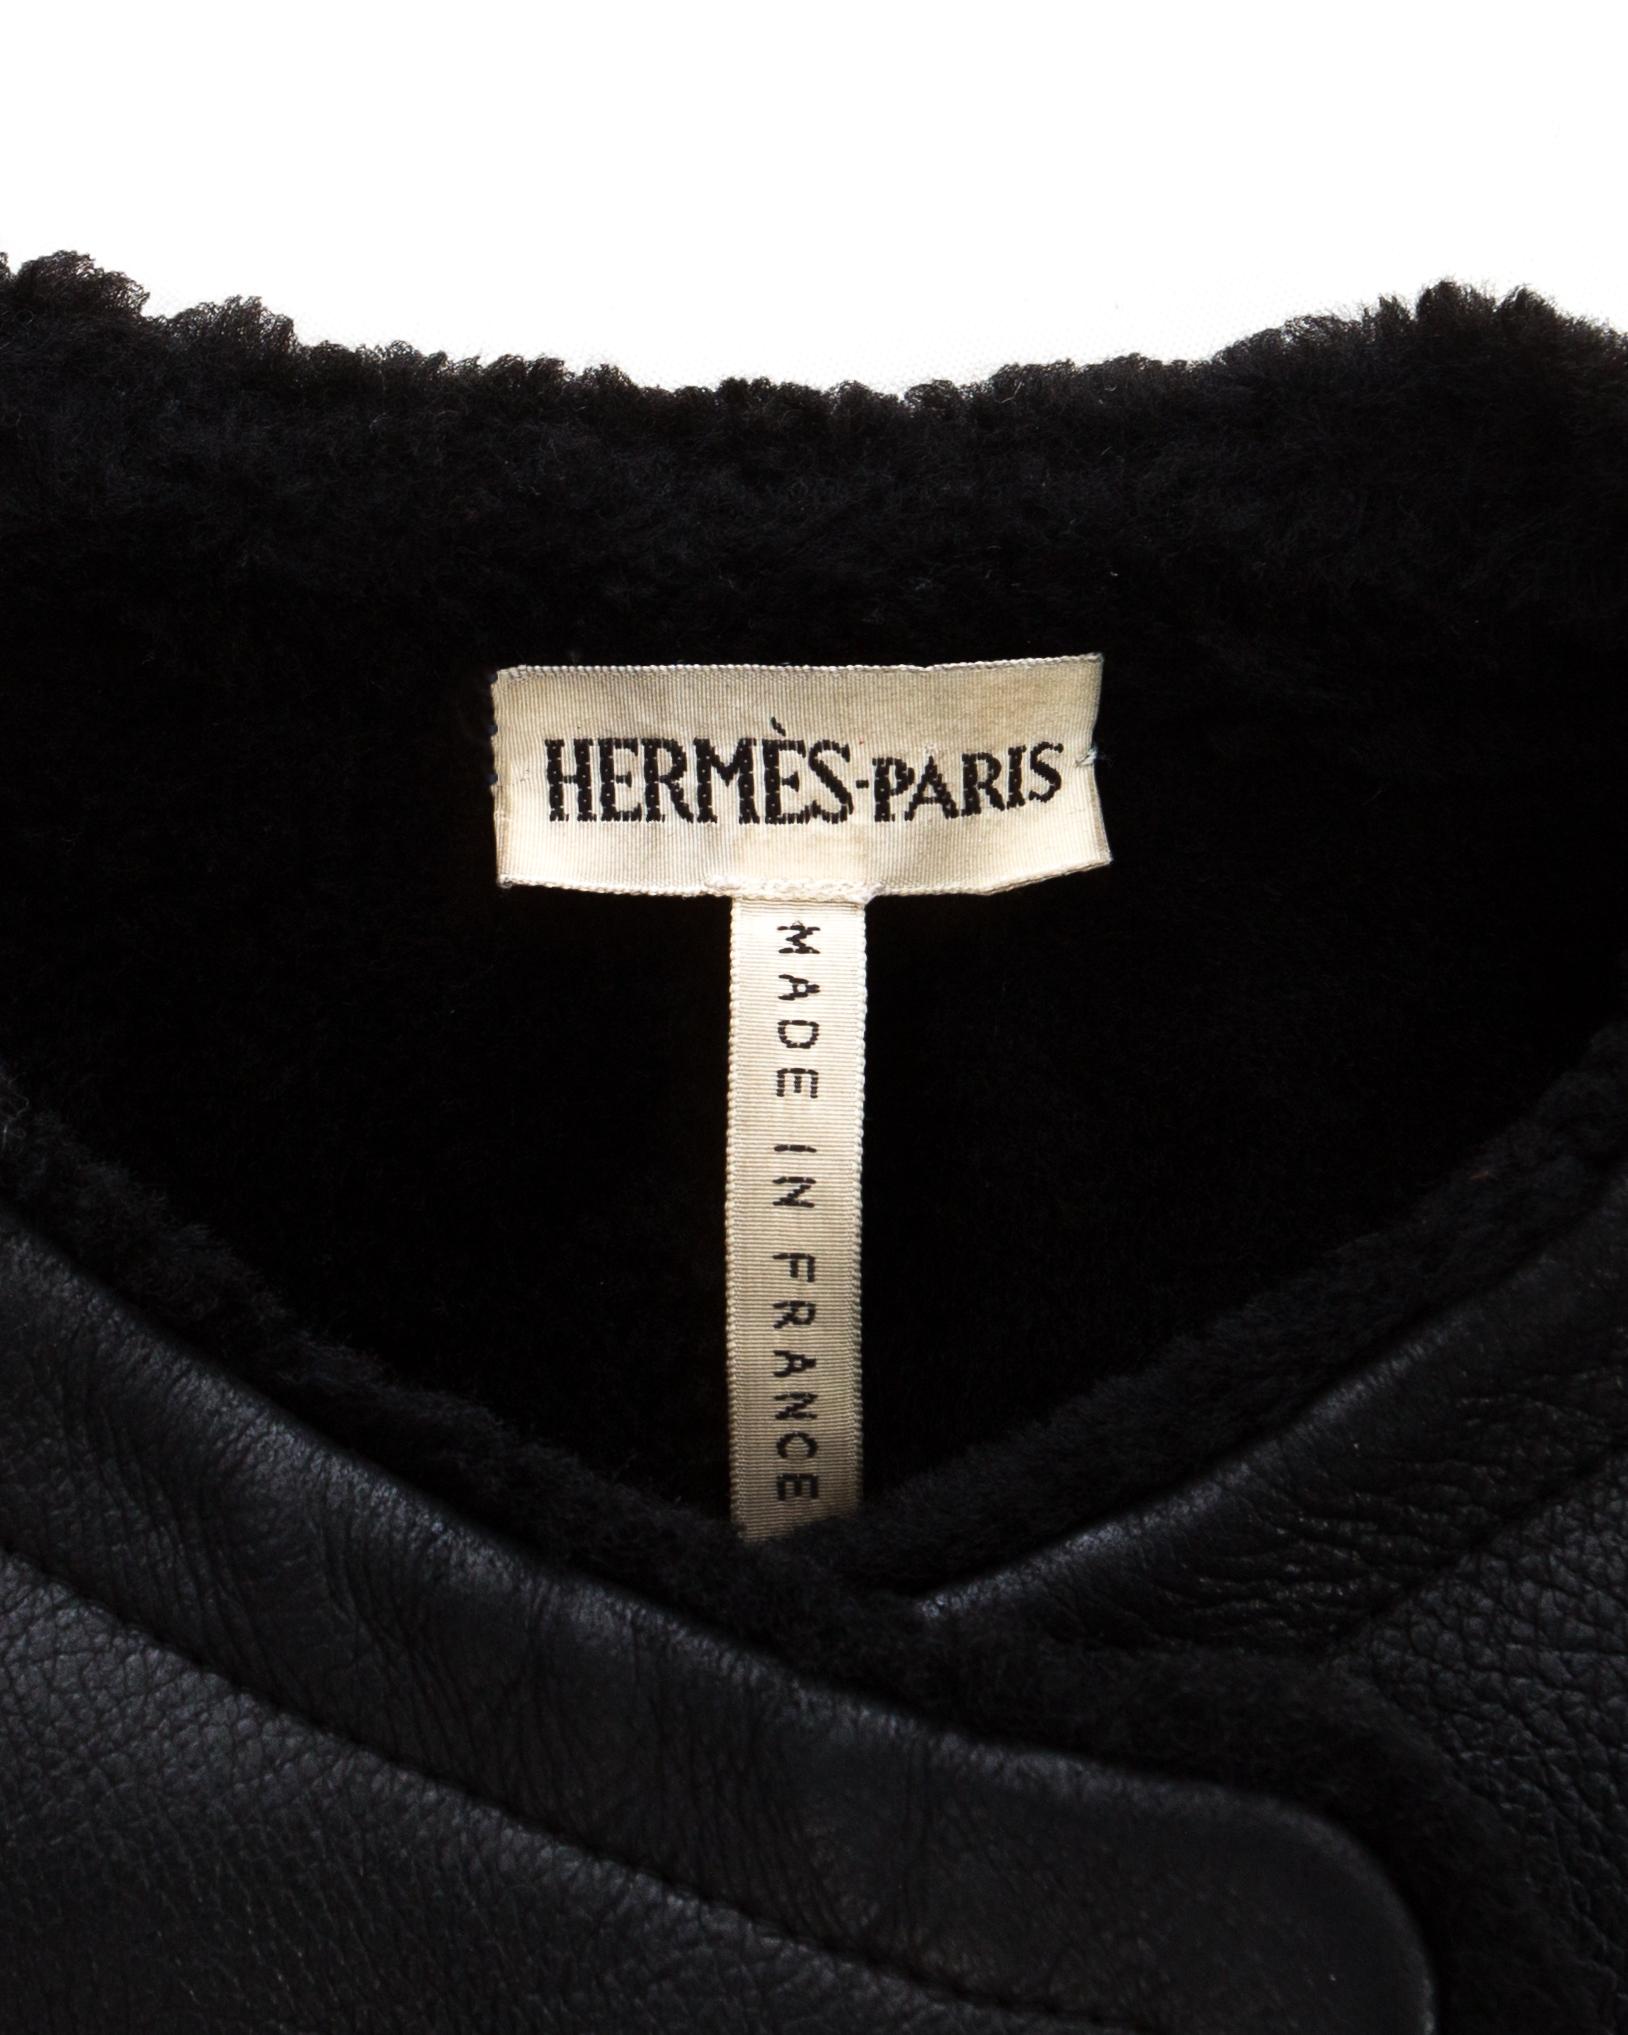 Hermes by Martin Margiela black shearling leather cropped jacket, fw 2002 1